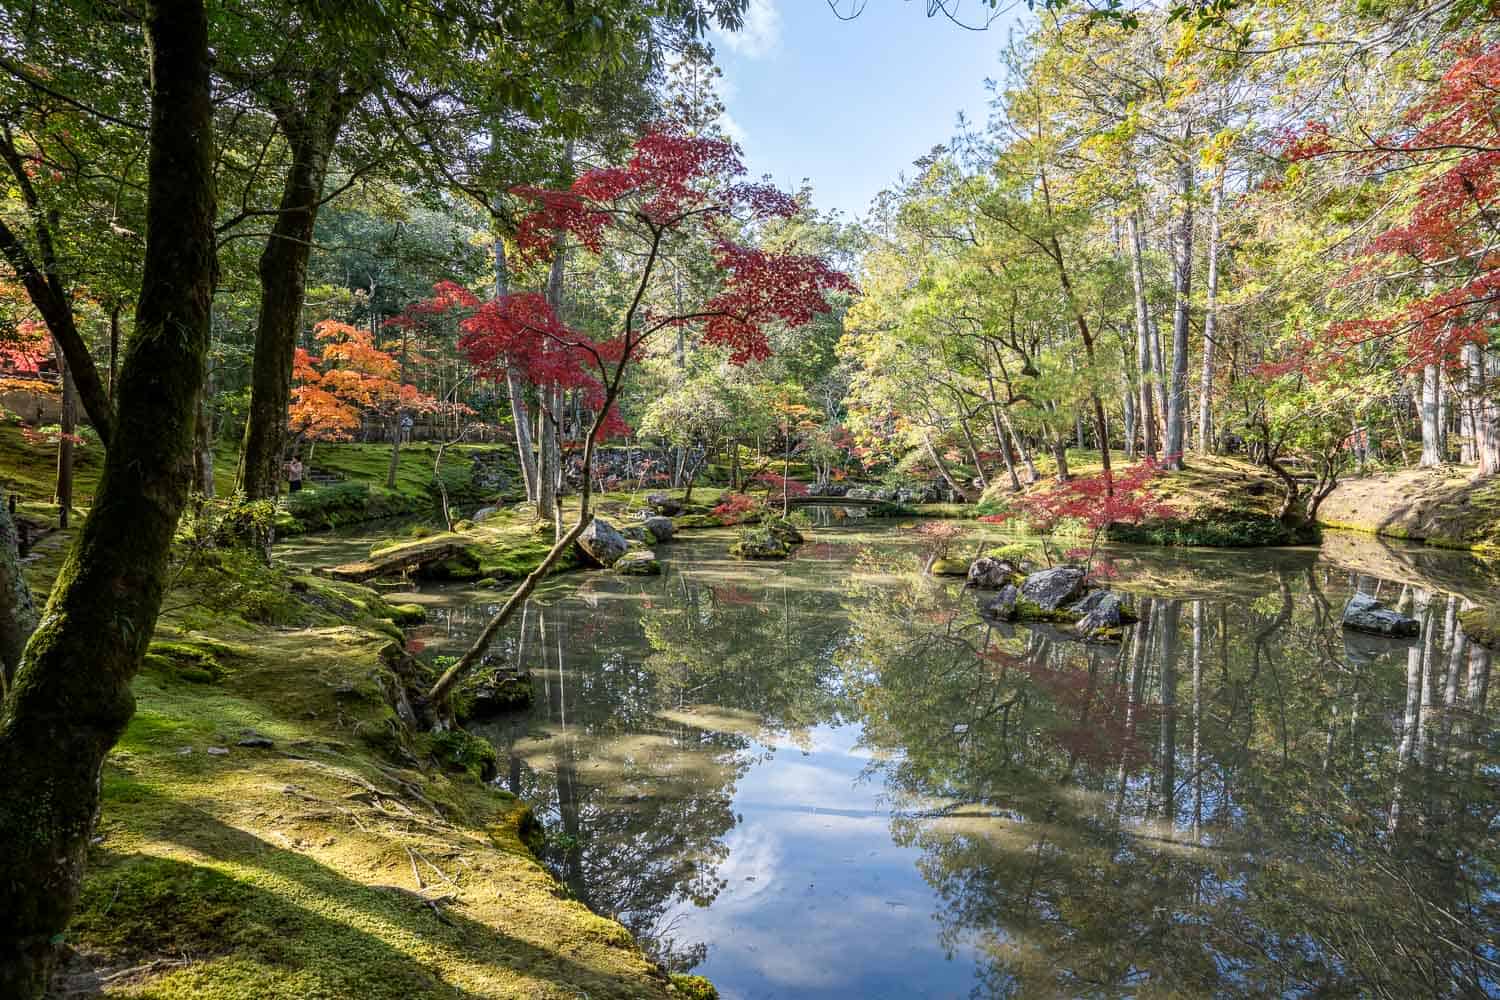 Pond in Moss Temple garden, Kyoto, Japan